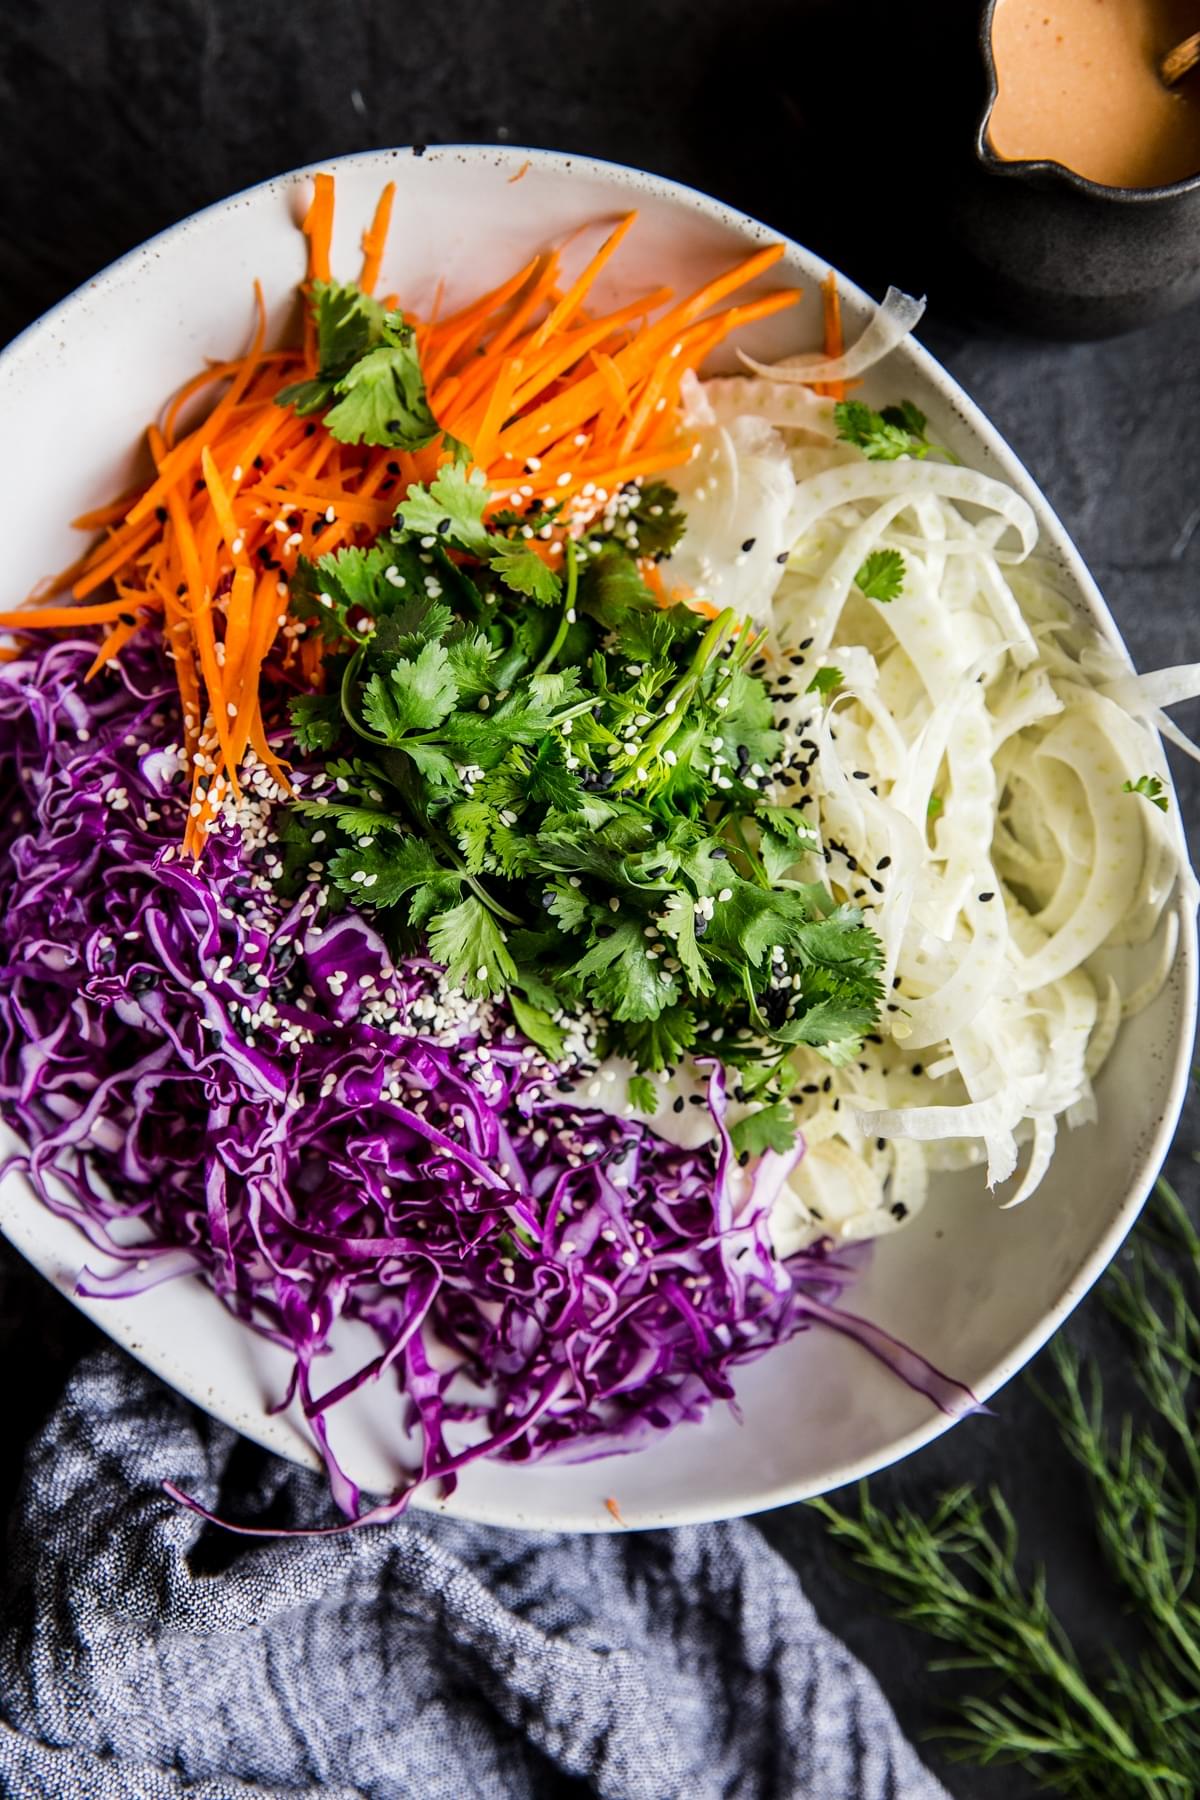 fennel, carrots, cilantro, red cabbage and sesame seeds in a bowl